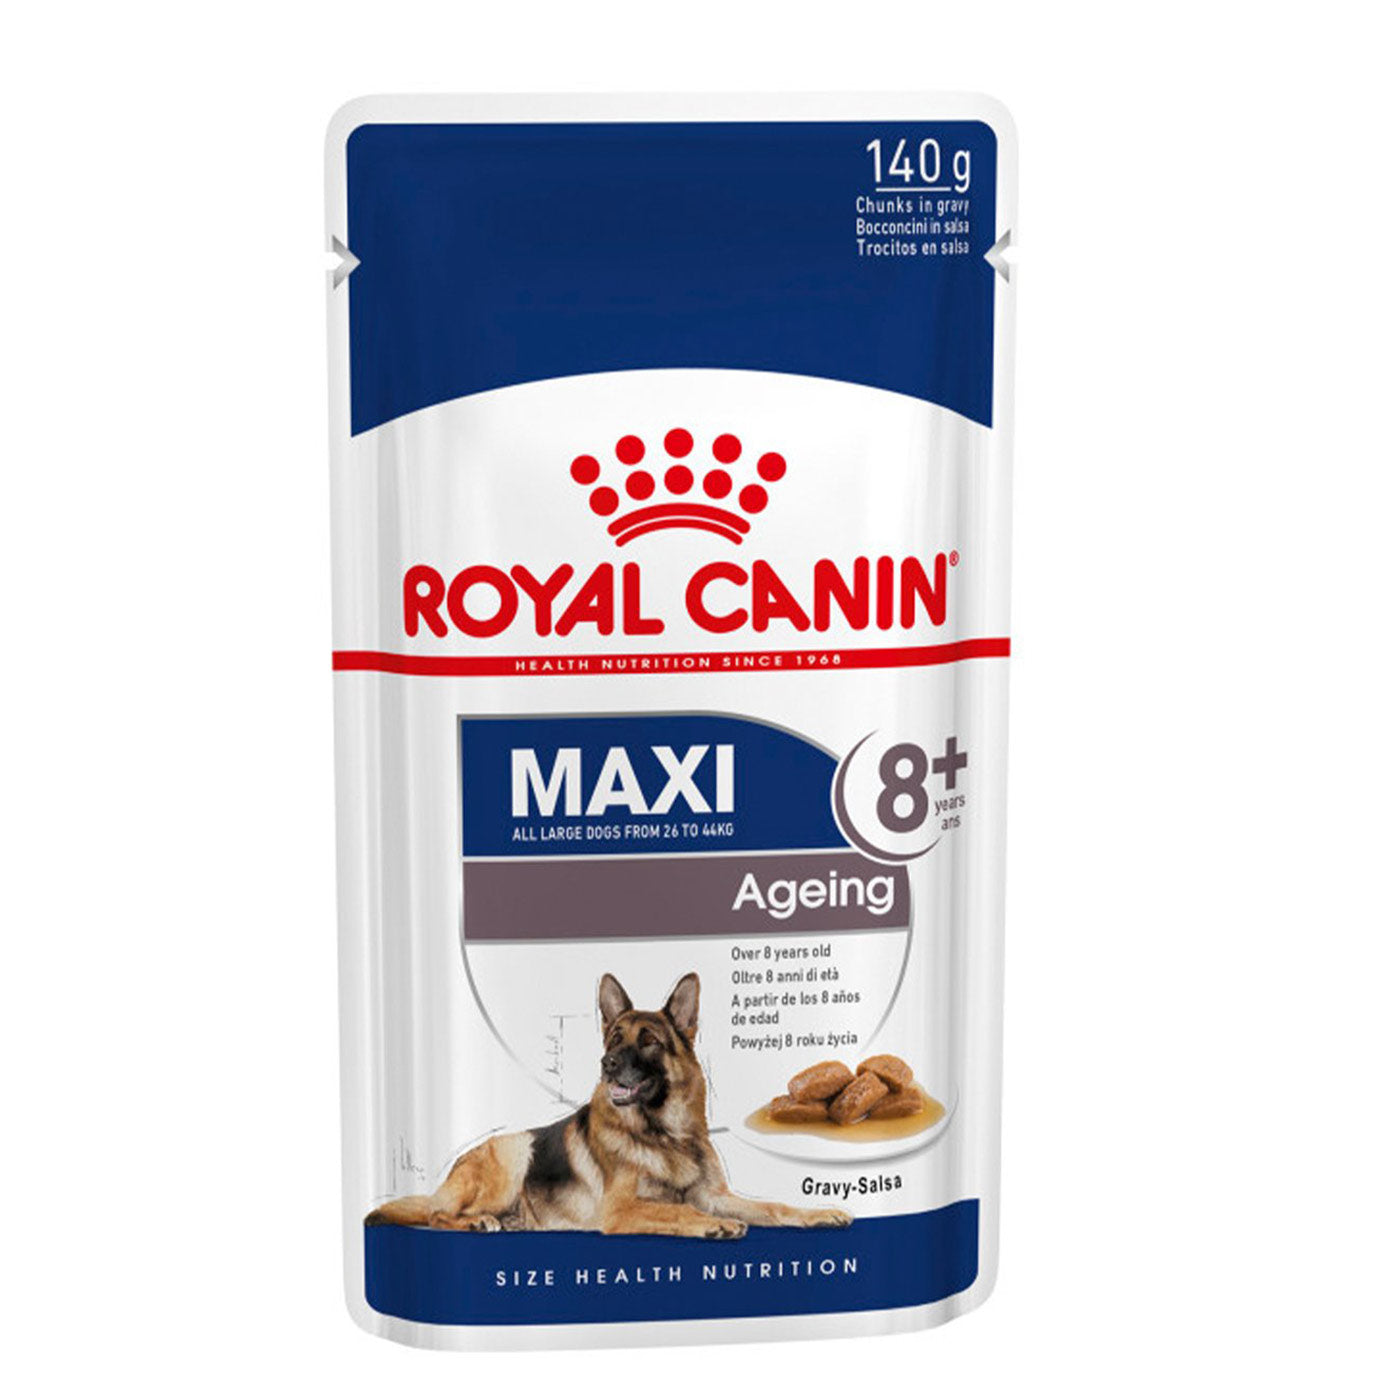 Royal Canin Maxi Ageing 8+ Wet Dog Food